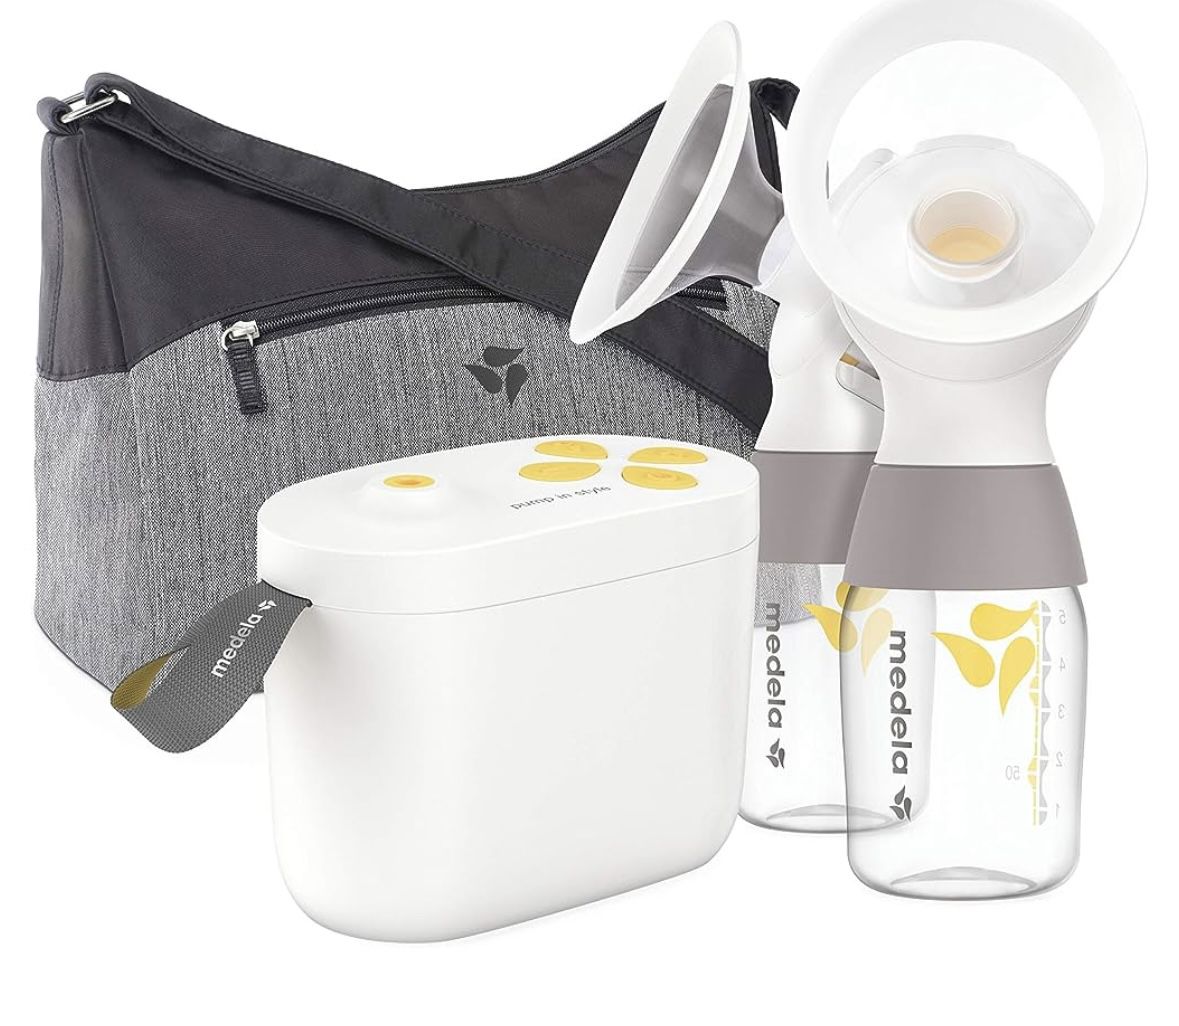 NEW Medela Breast Pump, Pump in Style with MaxFlow, Electric Breastpump, Closed System, Portable